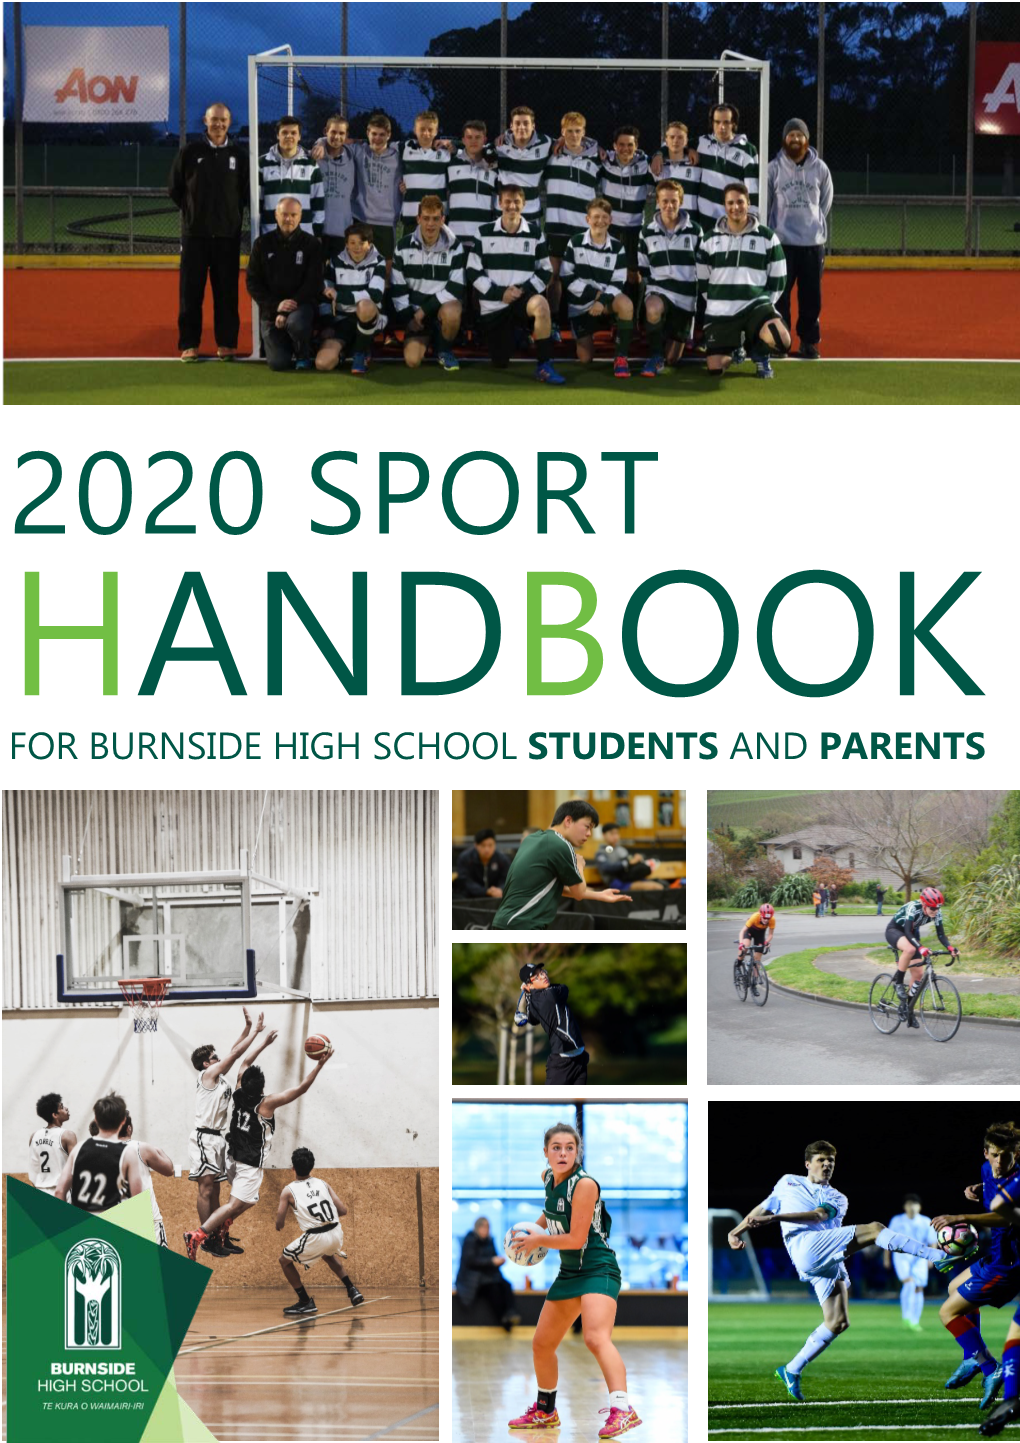 Sports Handbook Is Subject to Change and Costs Indicated Are Approximate Only